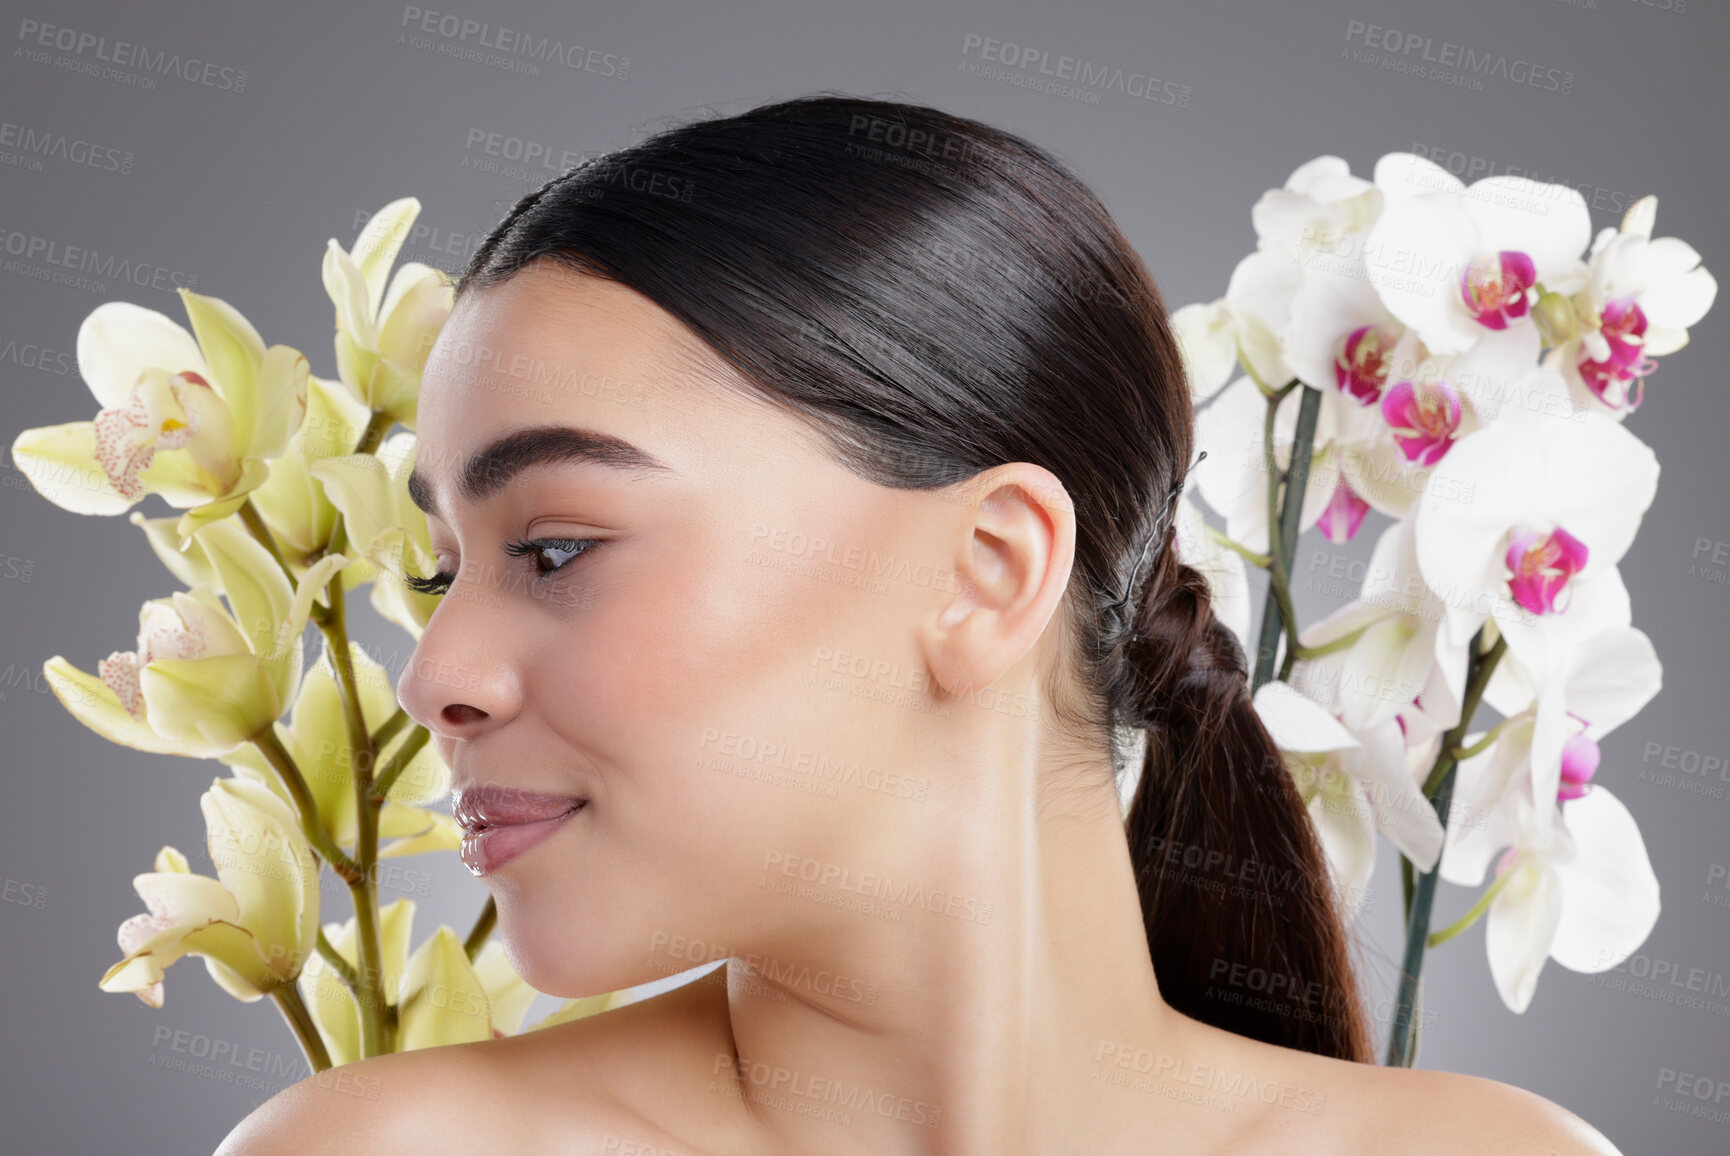 Buy stock photo Studio shot of an attractive young woman posing with two bunches of flowers against a grey background